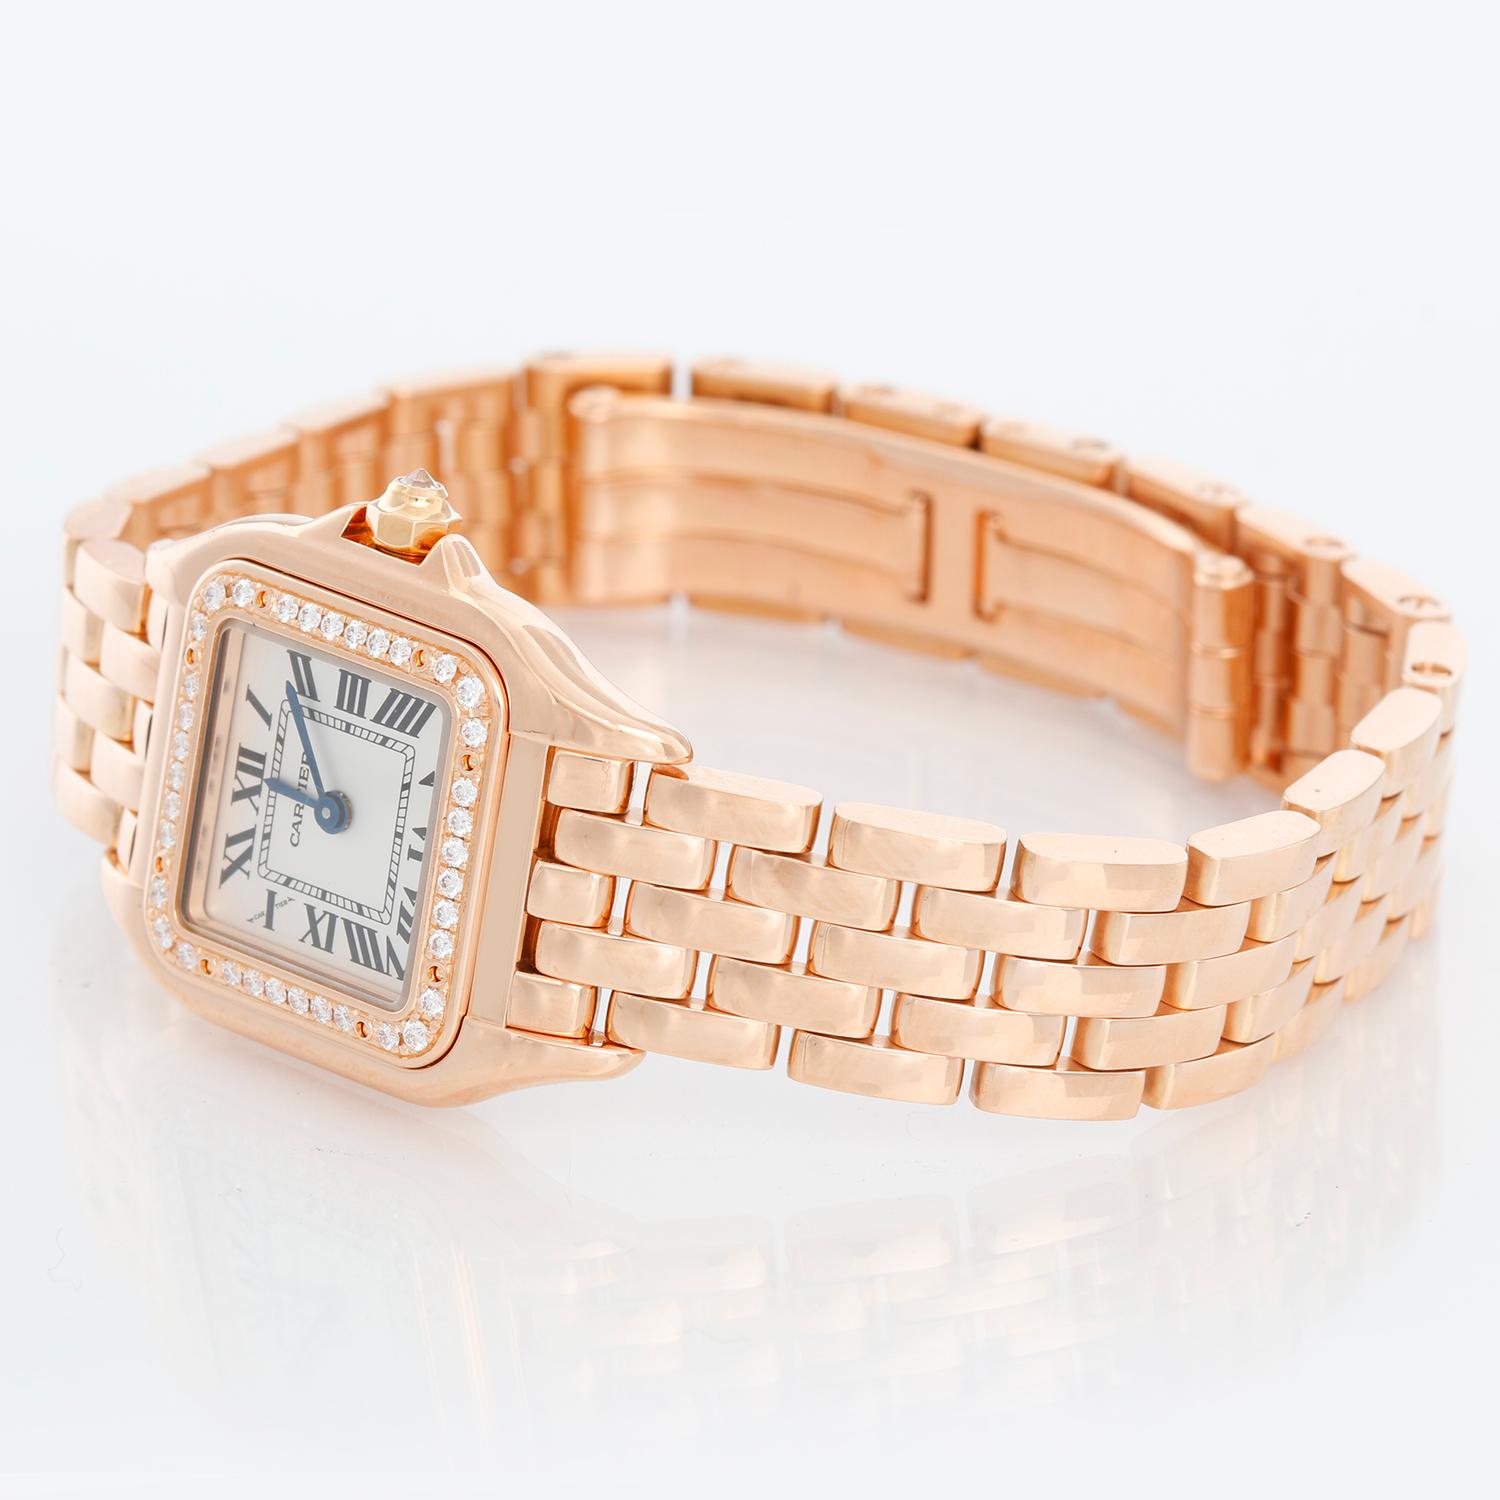 Cartier Rose Gold Small Panther With Diamonds Ladies Watch  - Quartz. 18K Rose Gold with brilliant cut diamond bezel  ( 22 x 30 mm ) . Silver dial with black roman numerals . 18K Rose Gold bracelet . Pre-owned with Cartier box with card. Dated 2018.